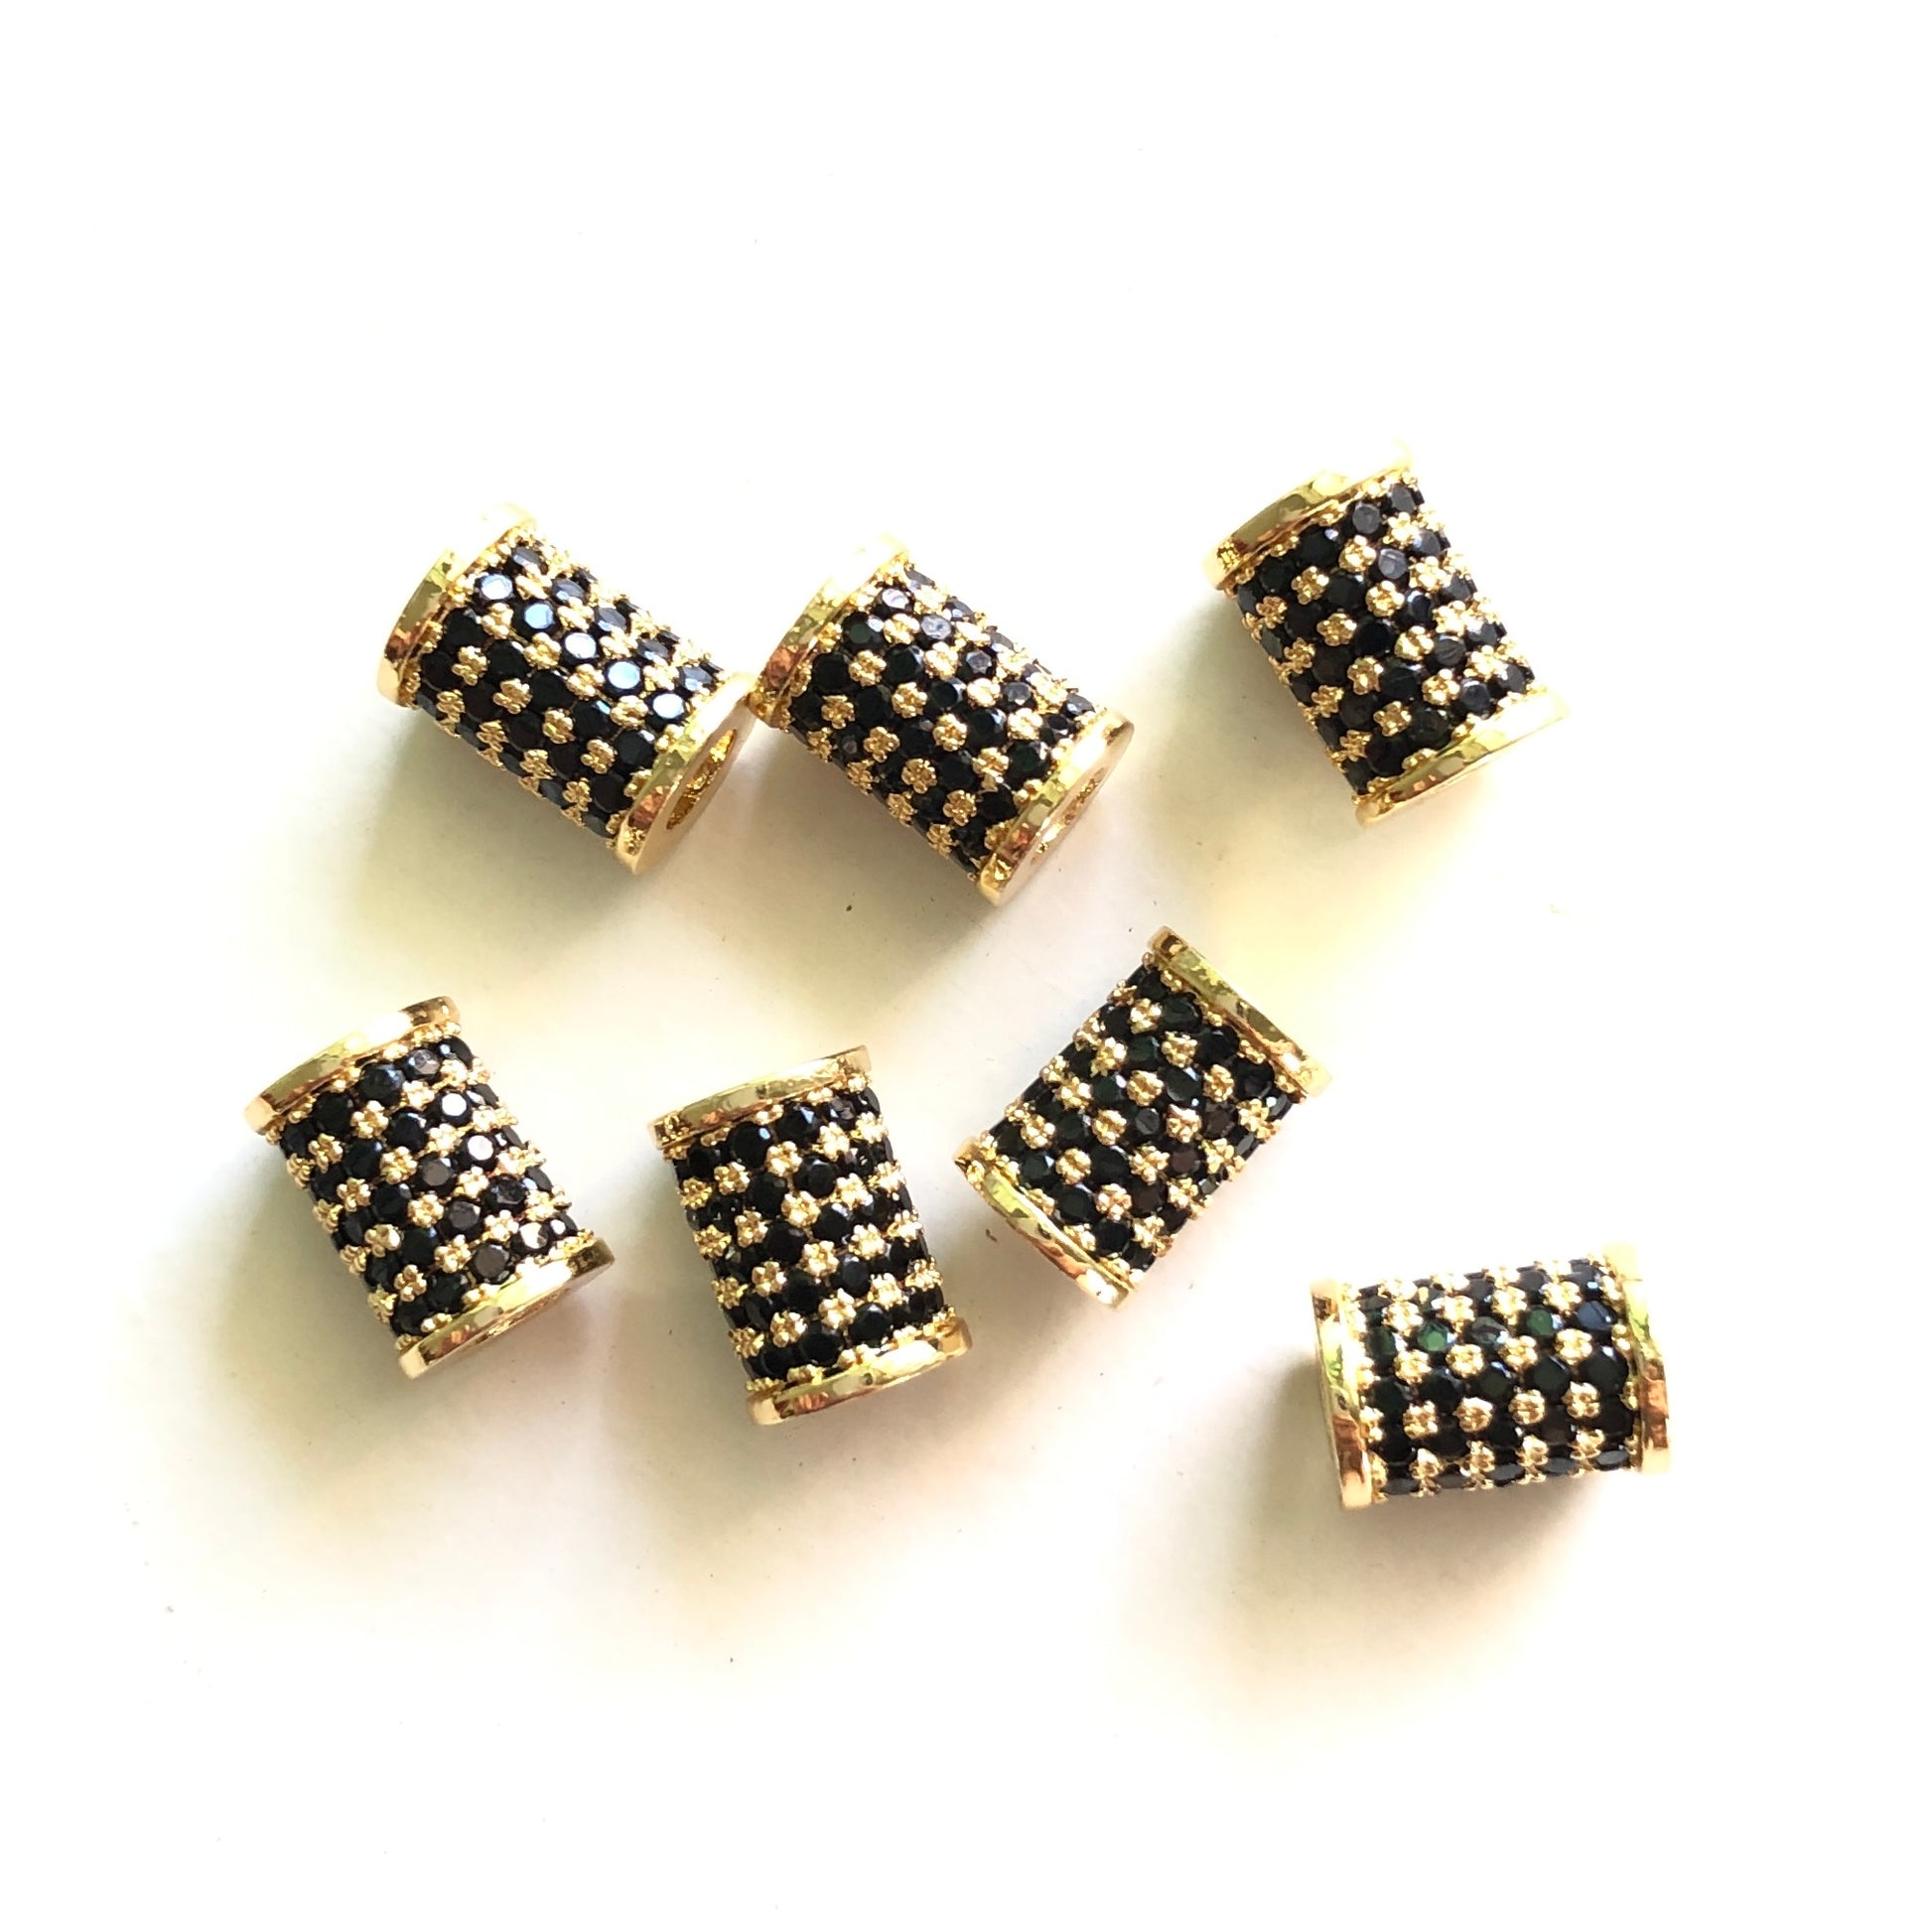 20pcs/lot 10*7mm Black CZ Paved Tube Spacers Gold CZ Paved Spacers Tube Bar Centerpieces Charms Beads Beyond